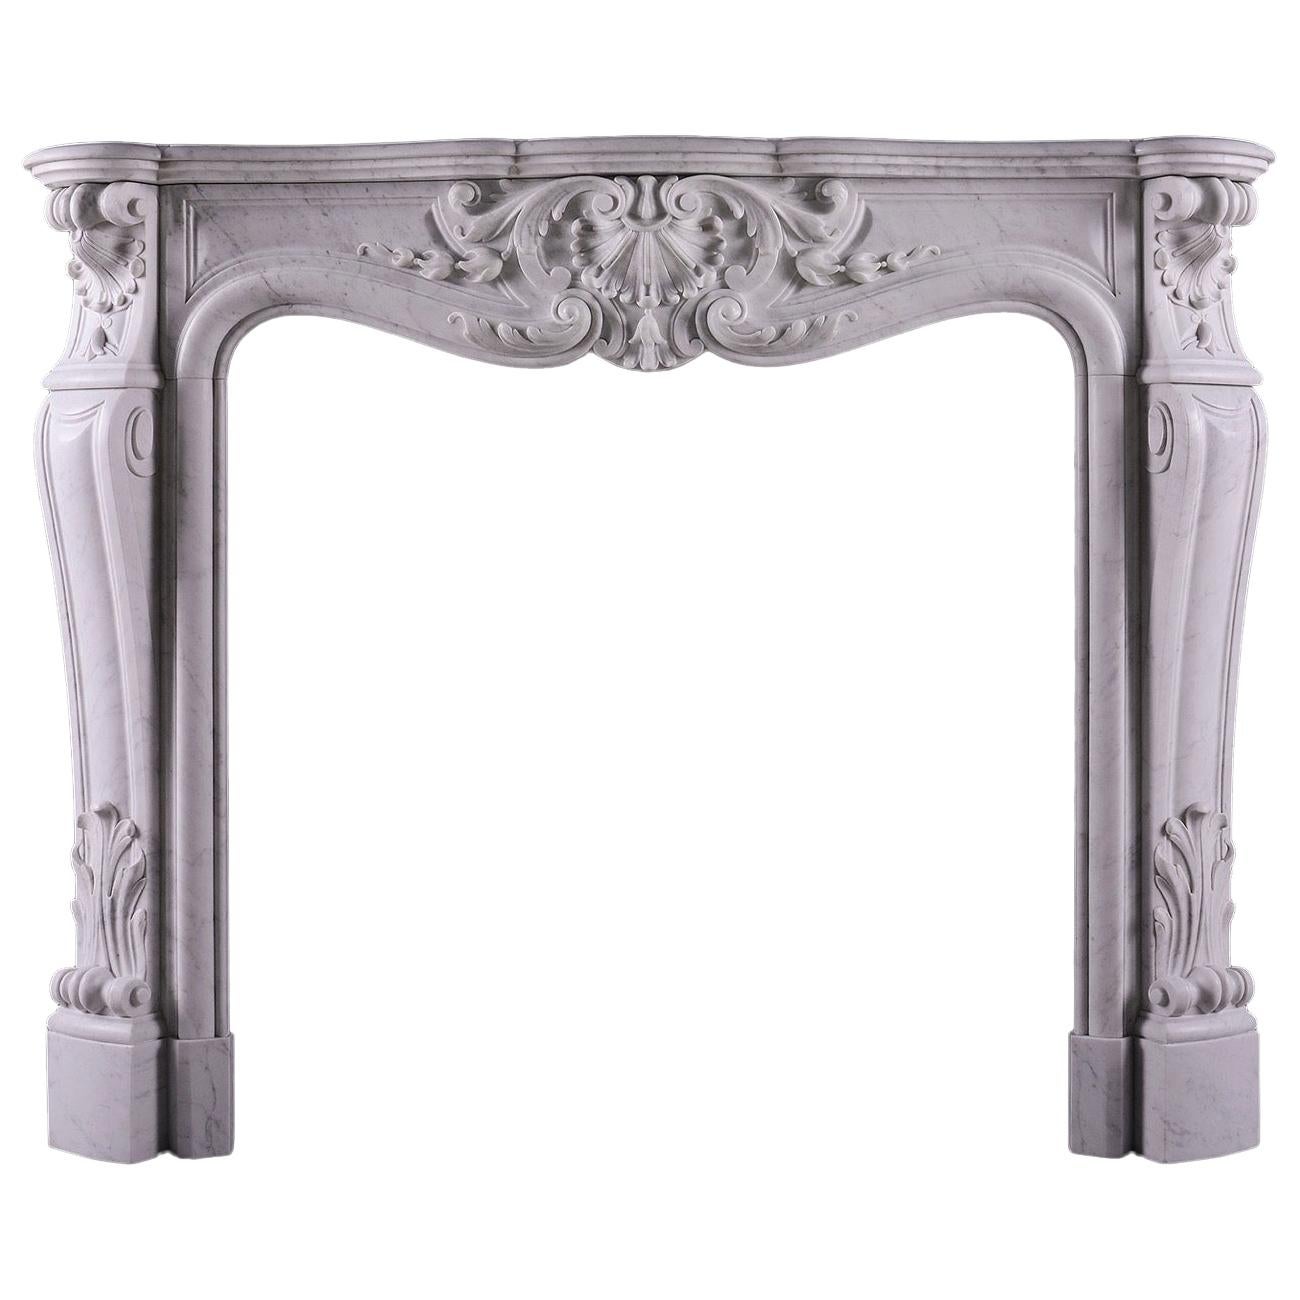 19th Century French Marble Fireplace in the Louis XV Manner